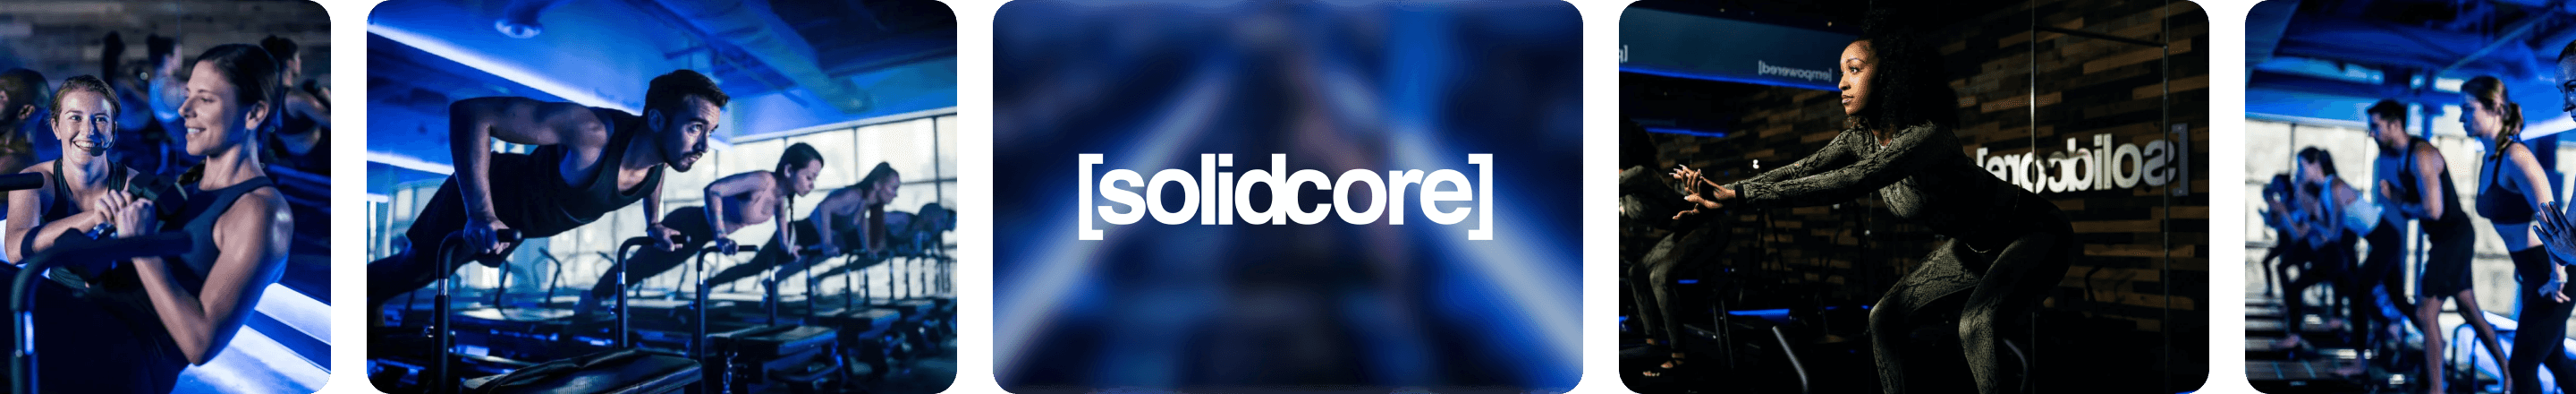 [solidcore]-collage